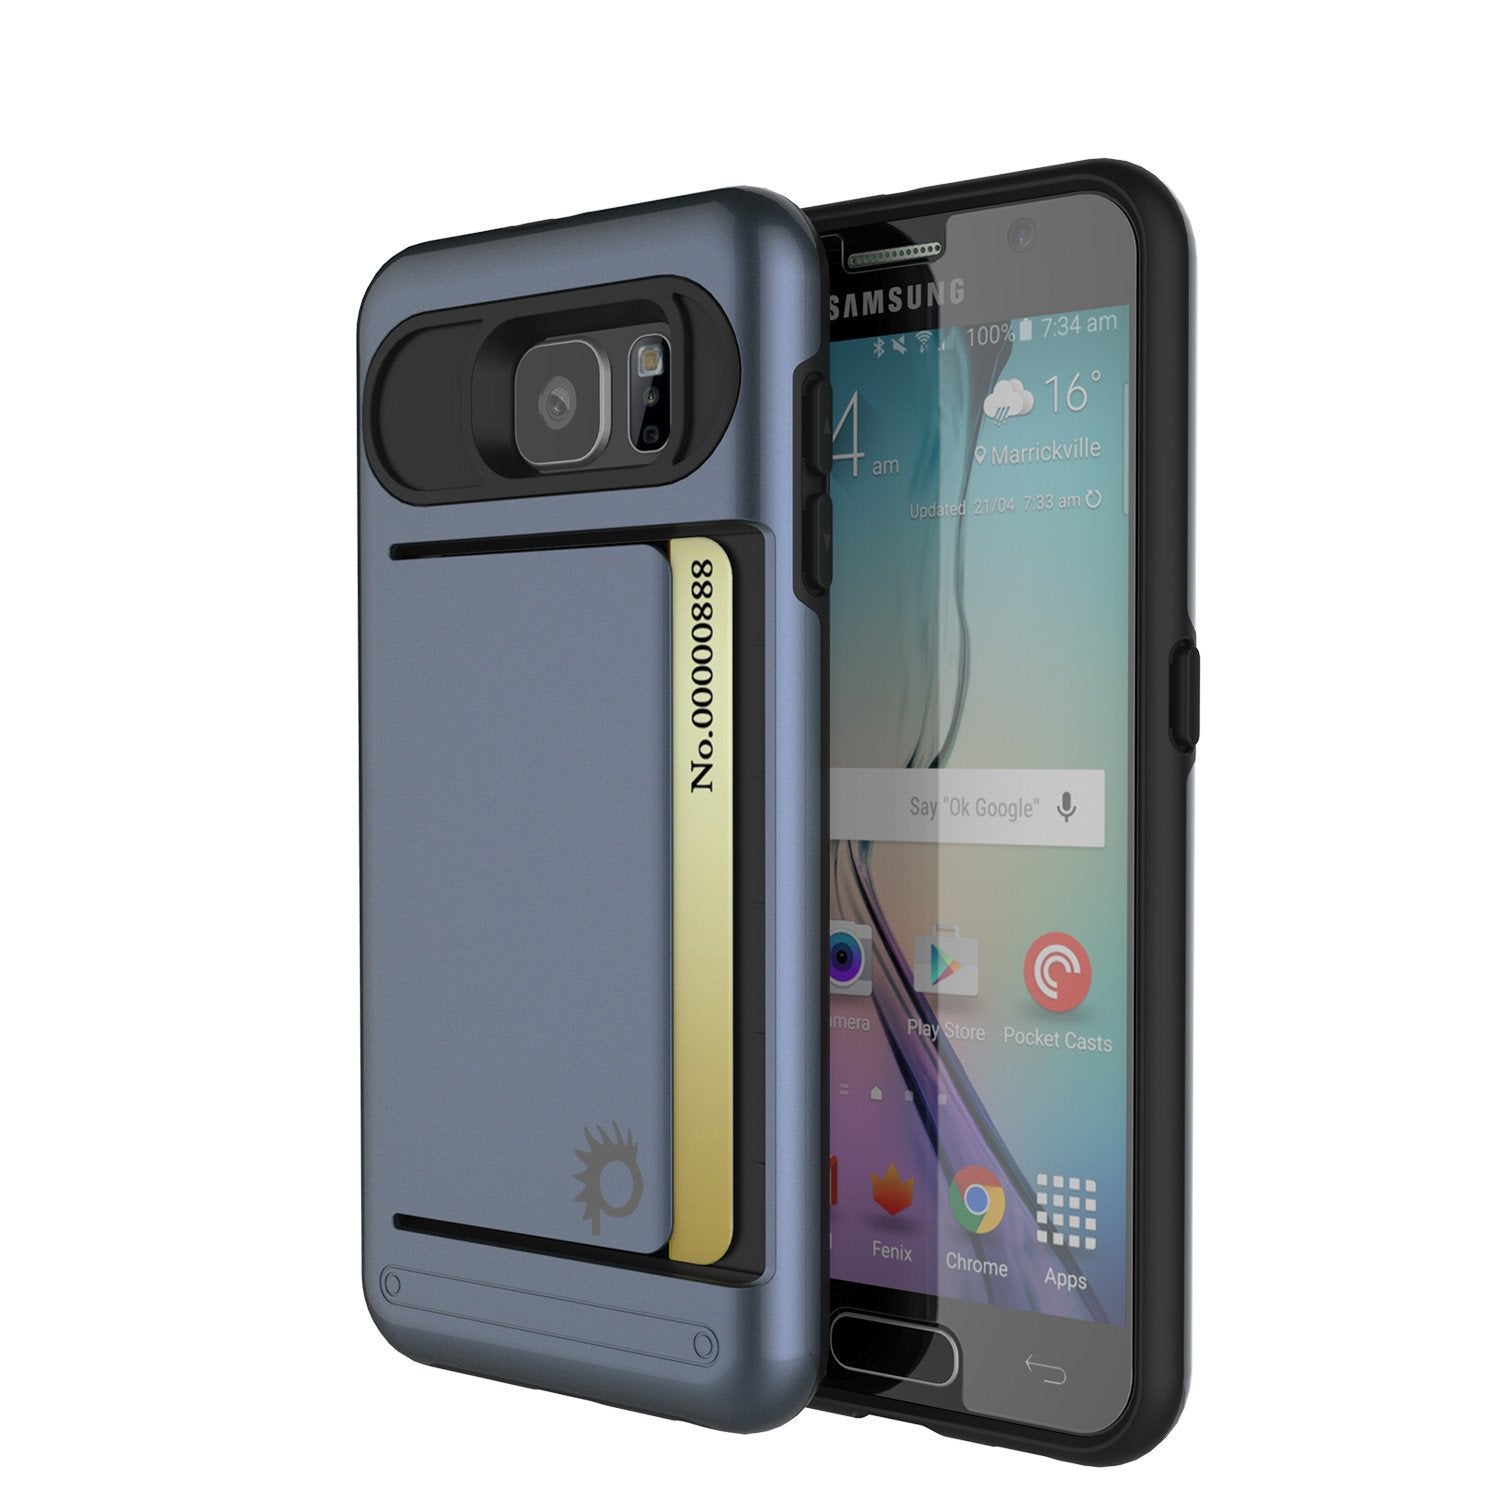 Galaxy S6 EDGE Case PunkCase CLUTCH Navy Series Slim Armor Soft Cover Case w/ Screen Protector - PunkCase NZ